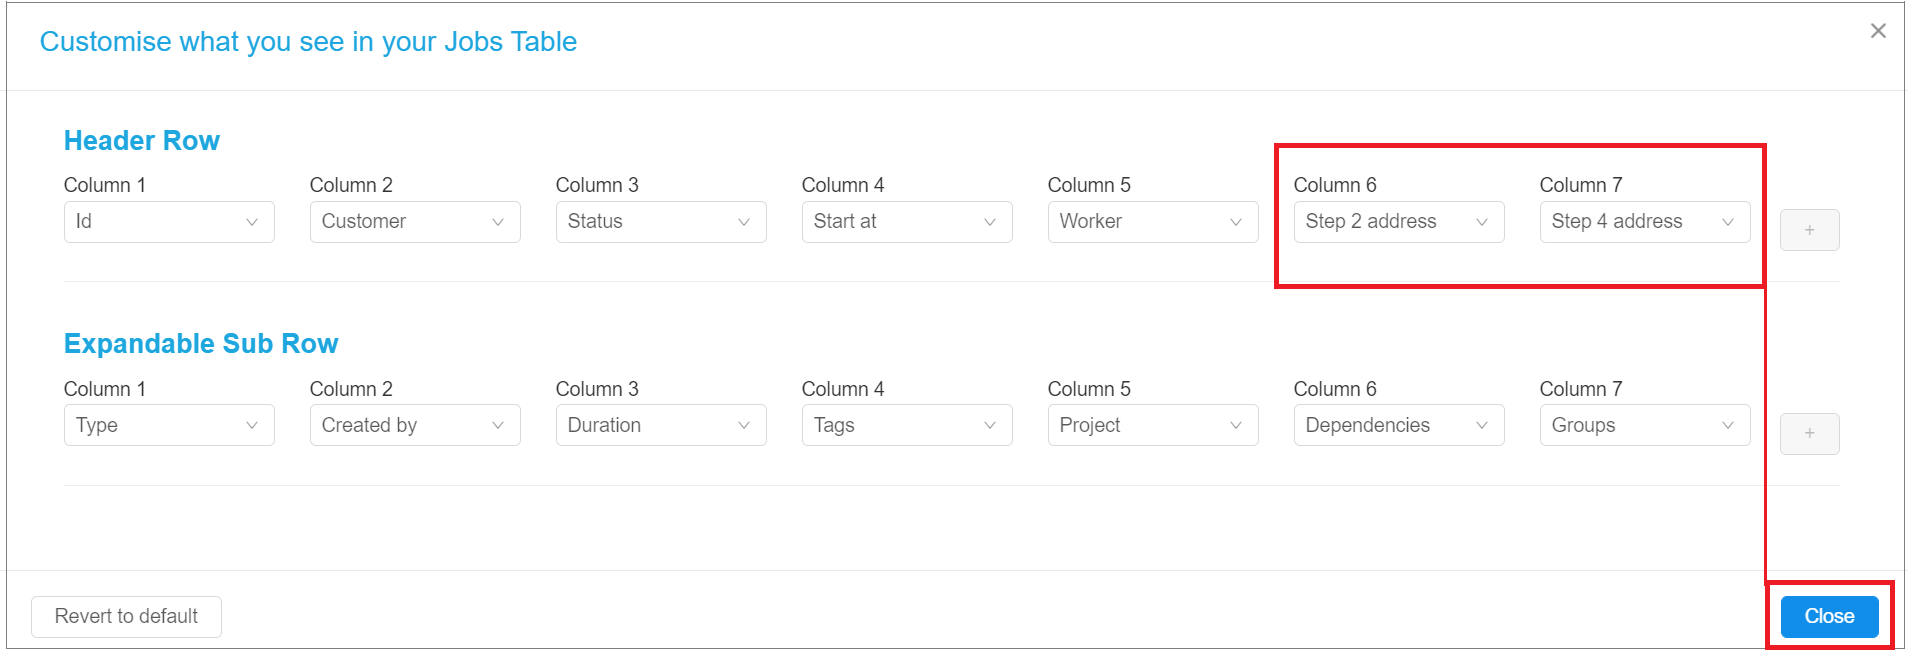 Job_List_customise_columns_close_to_save_changes.png